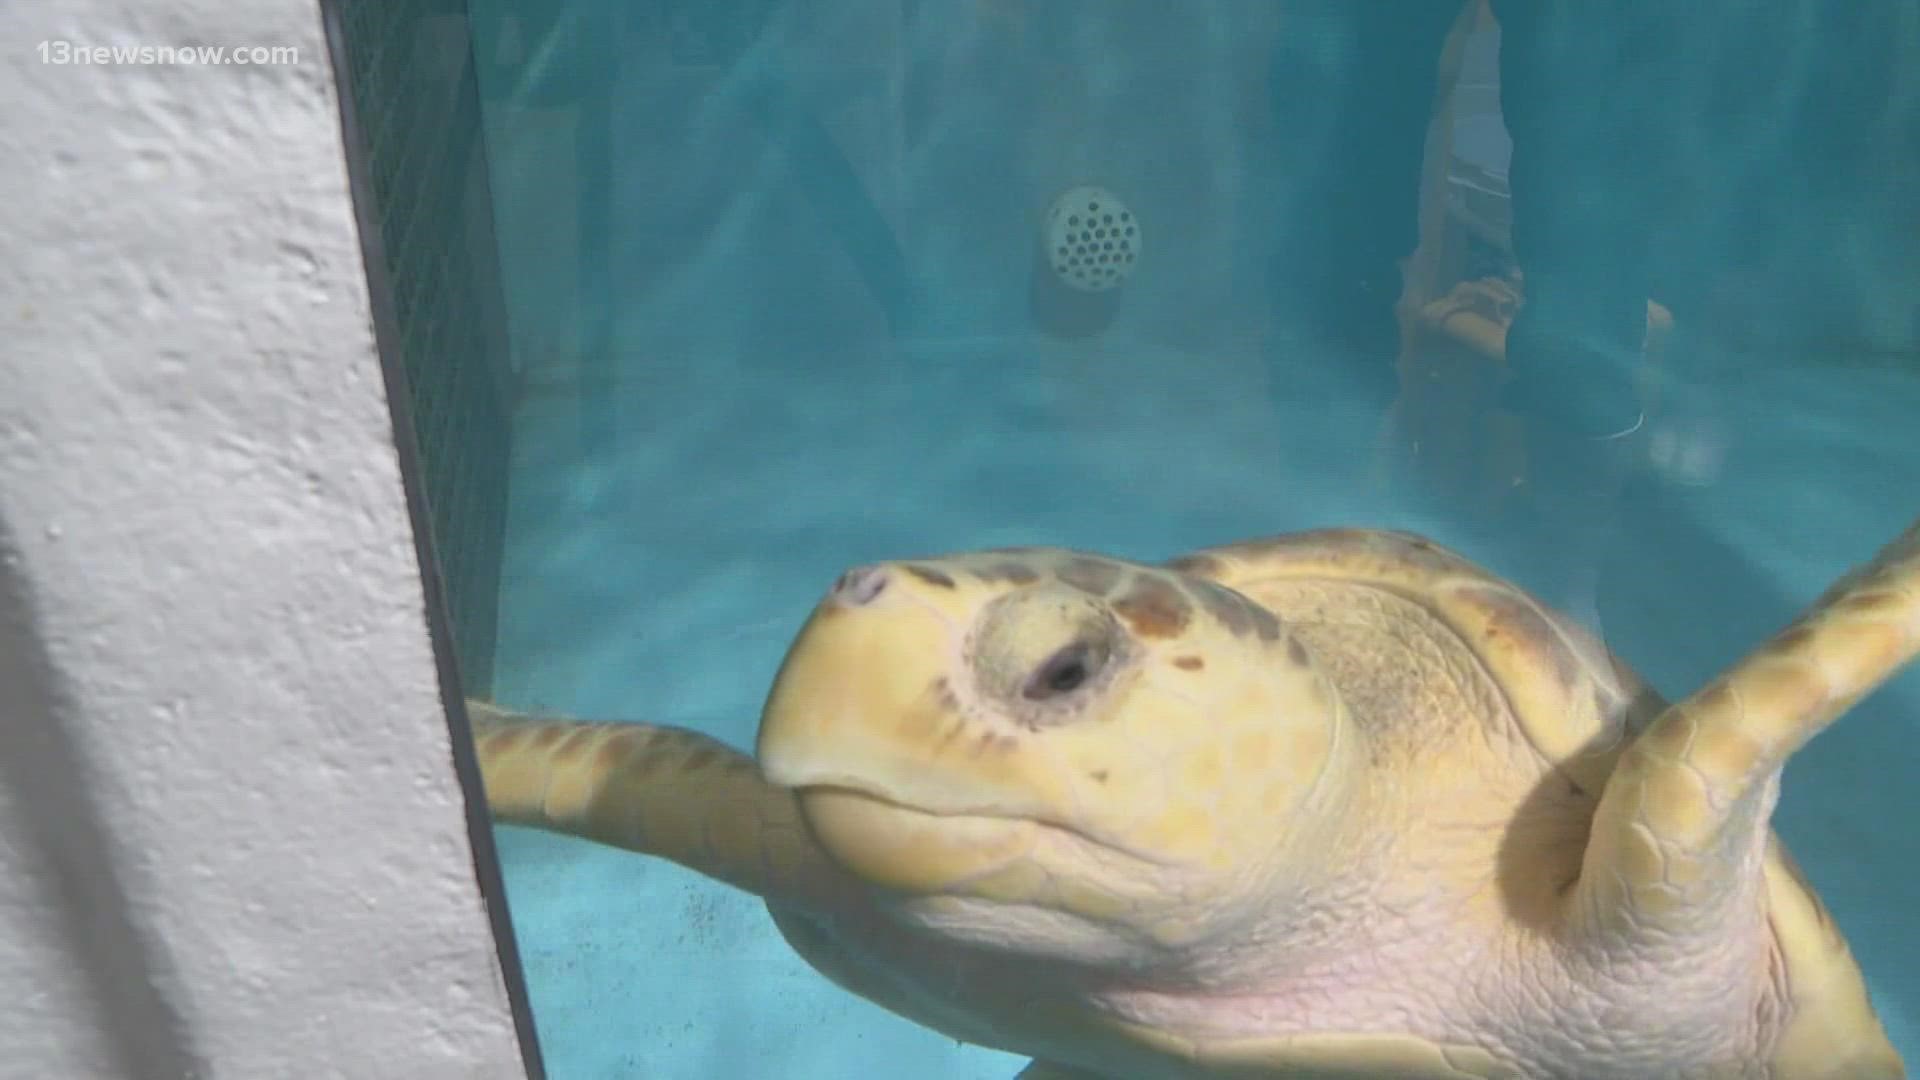 The aquarium's Stranding and Response Team has rescued 71 sea turtles this year alone.